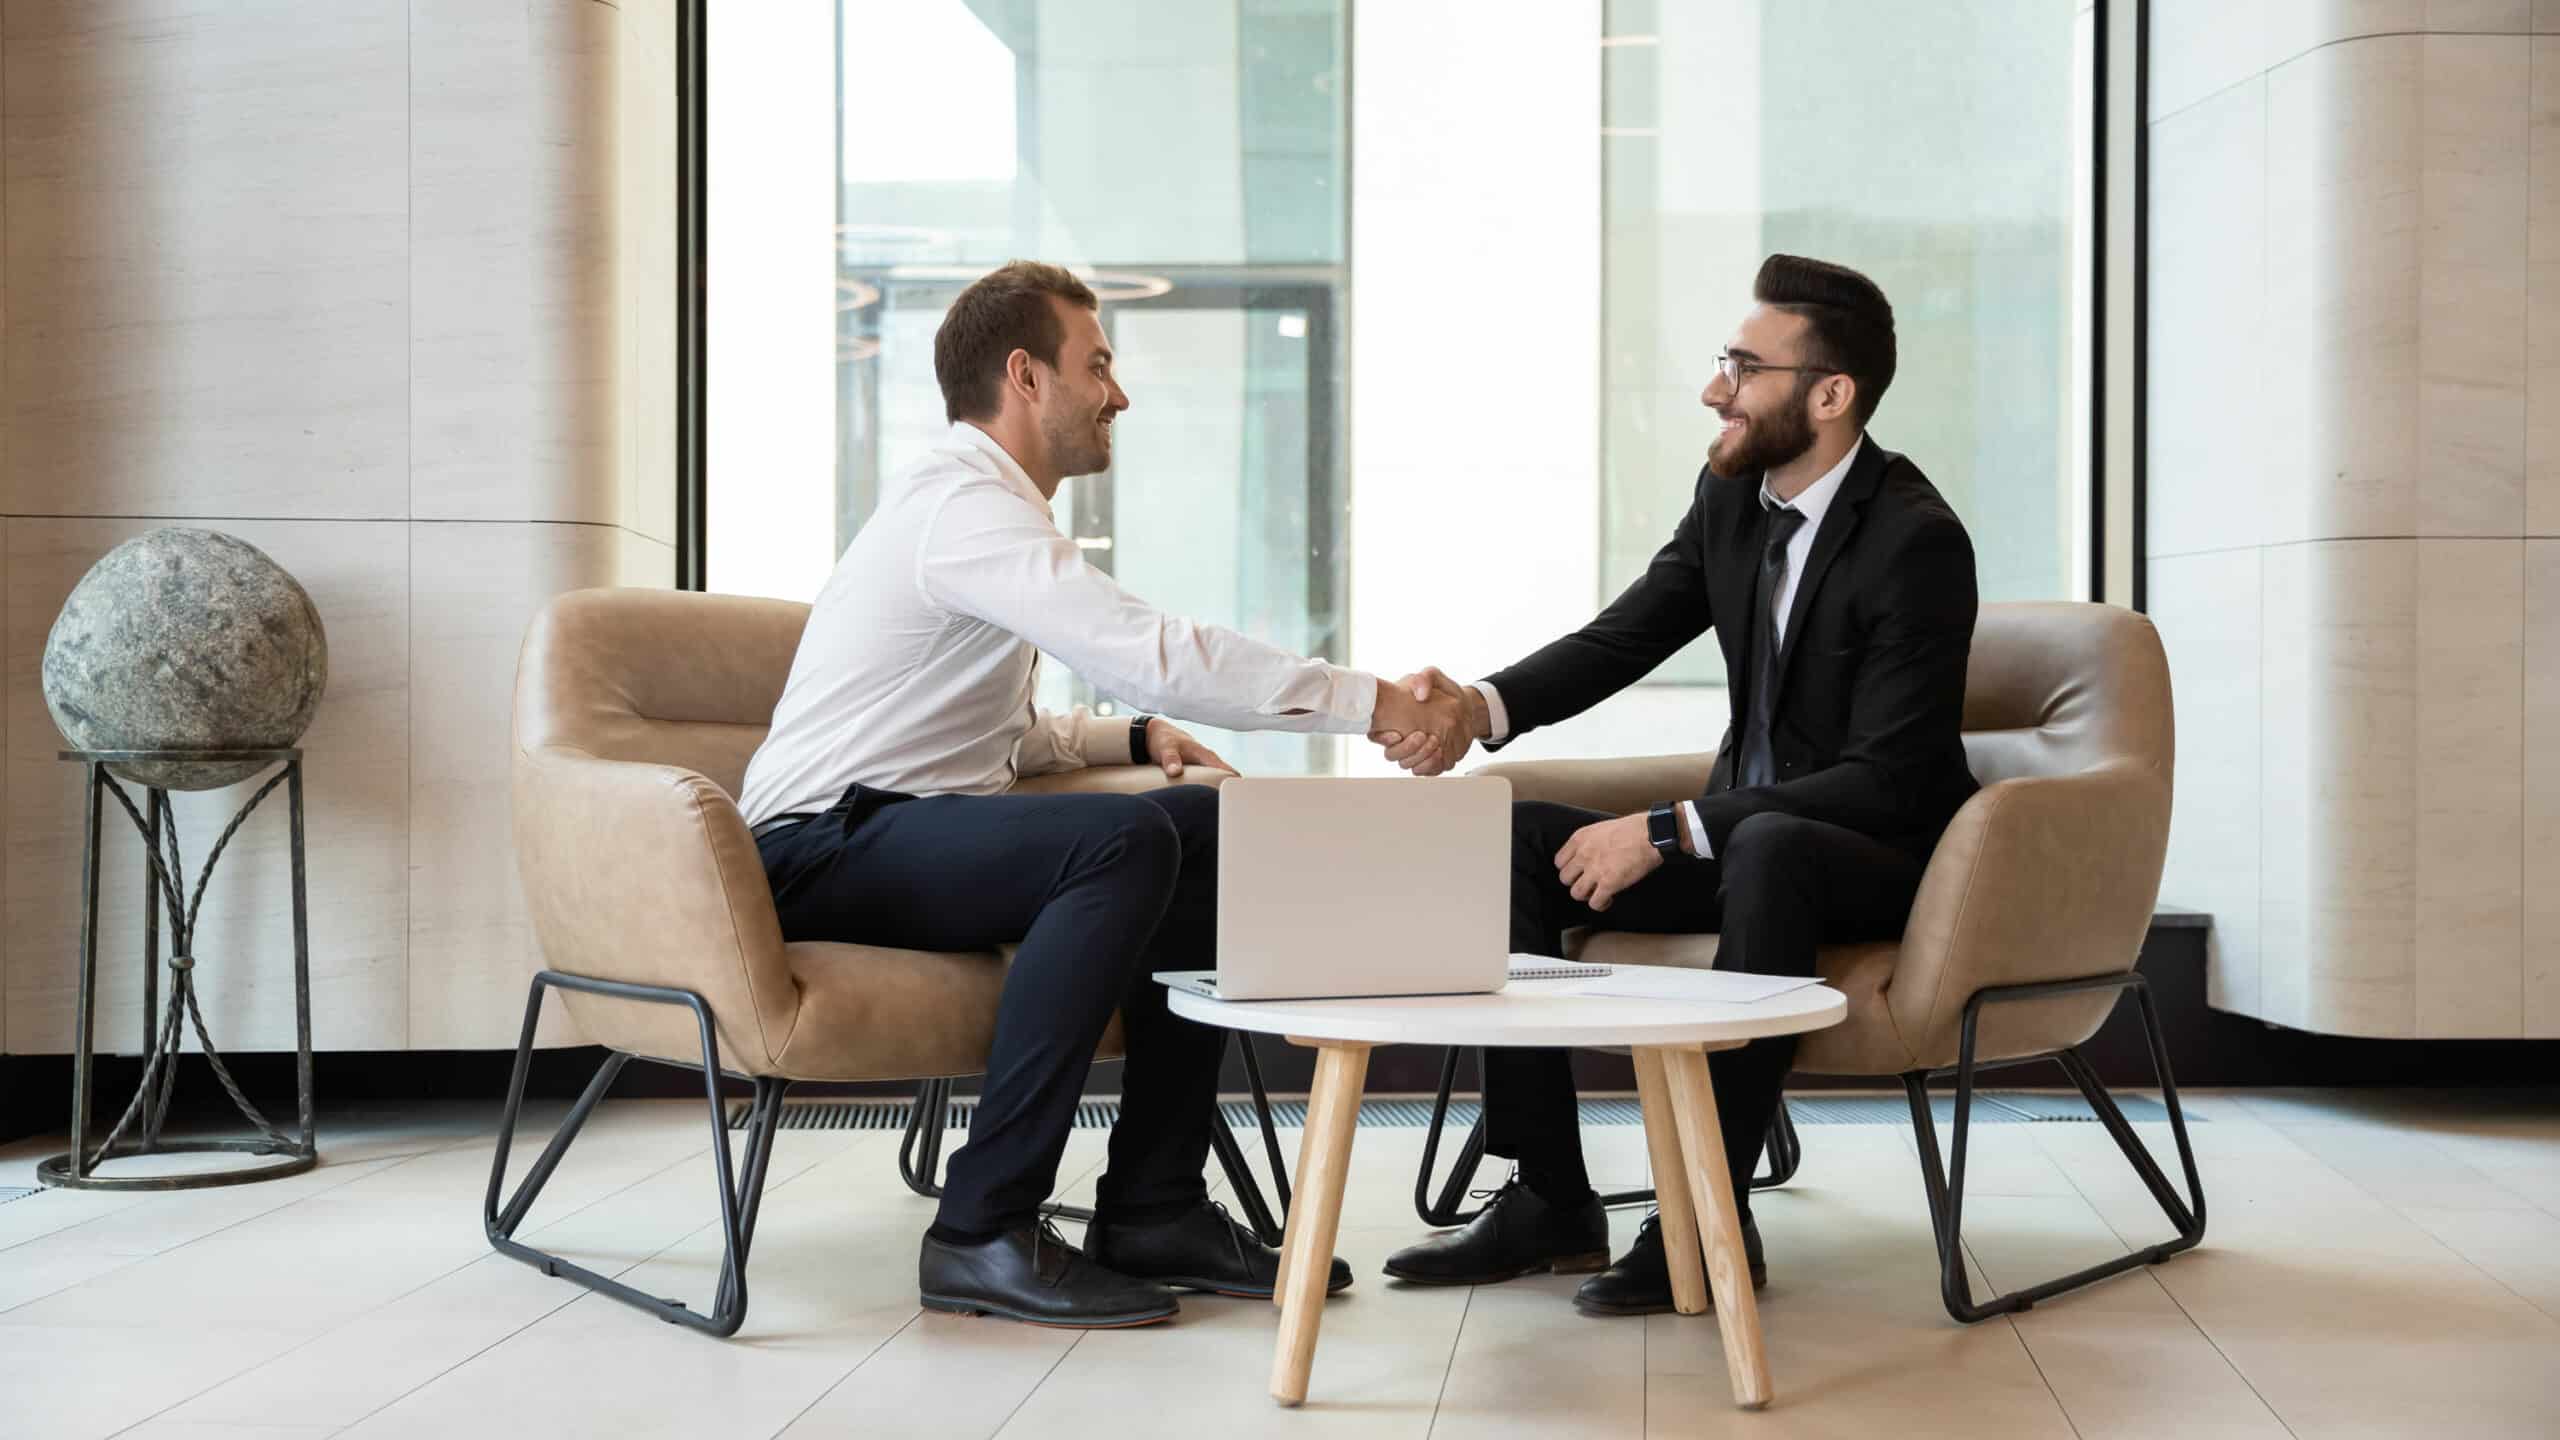 Men shaking hand at interview